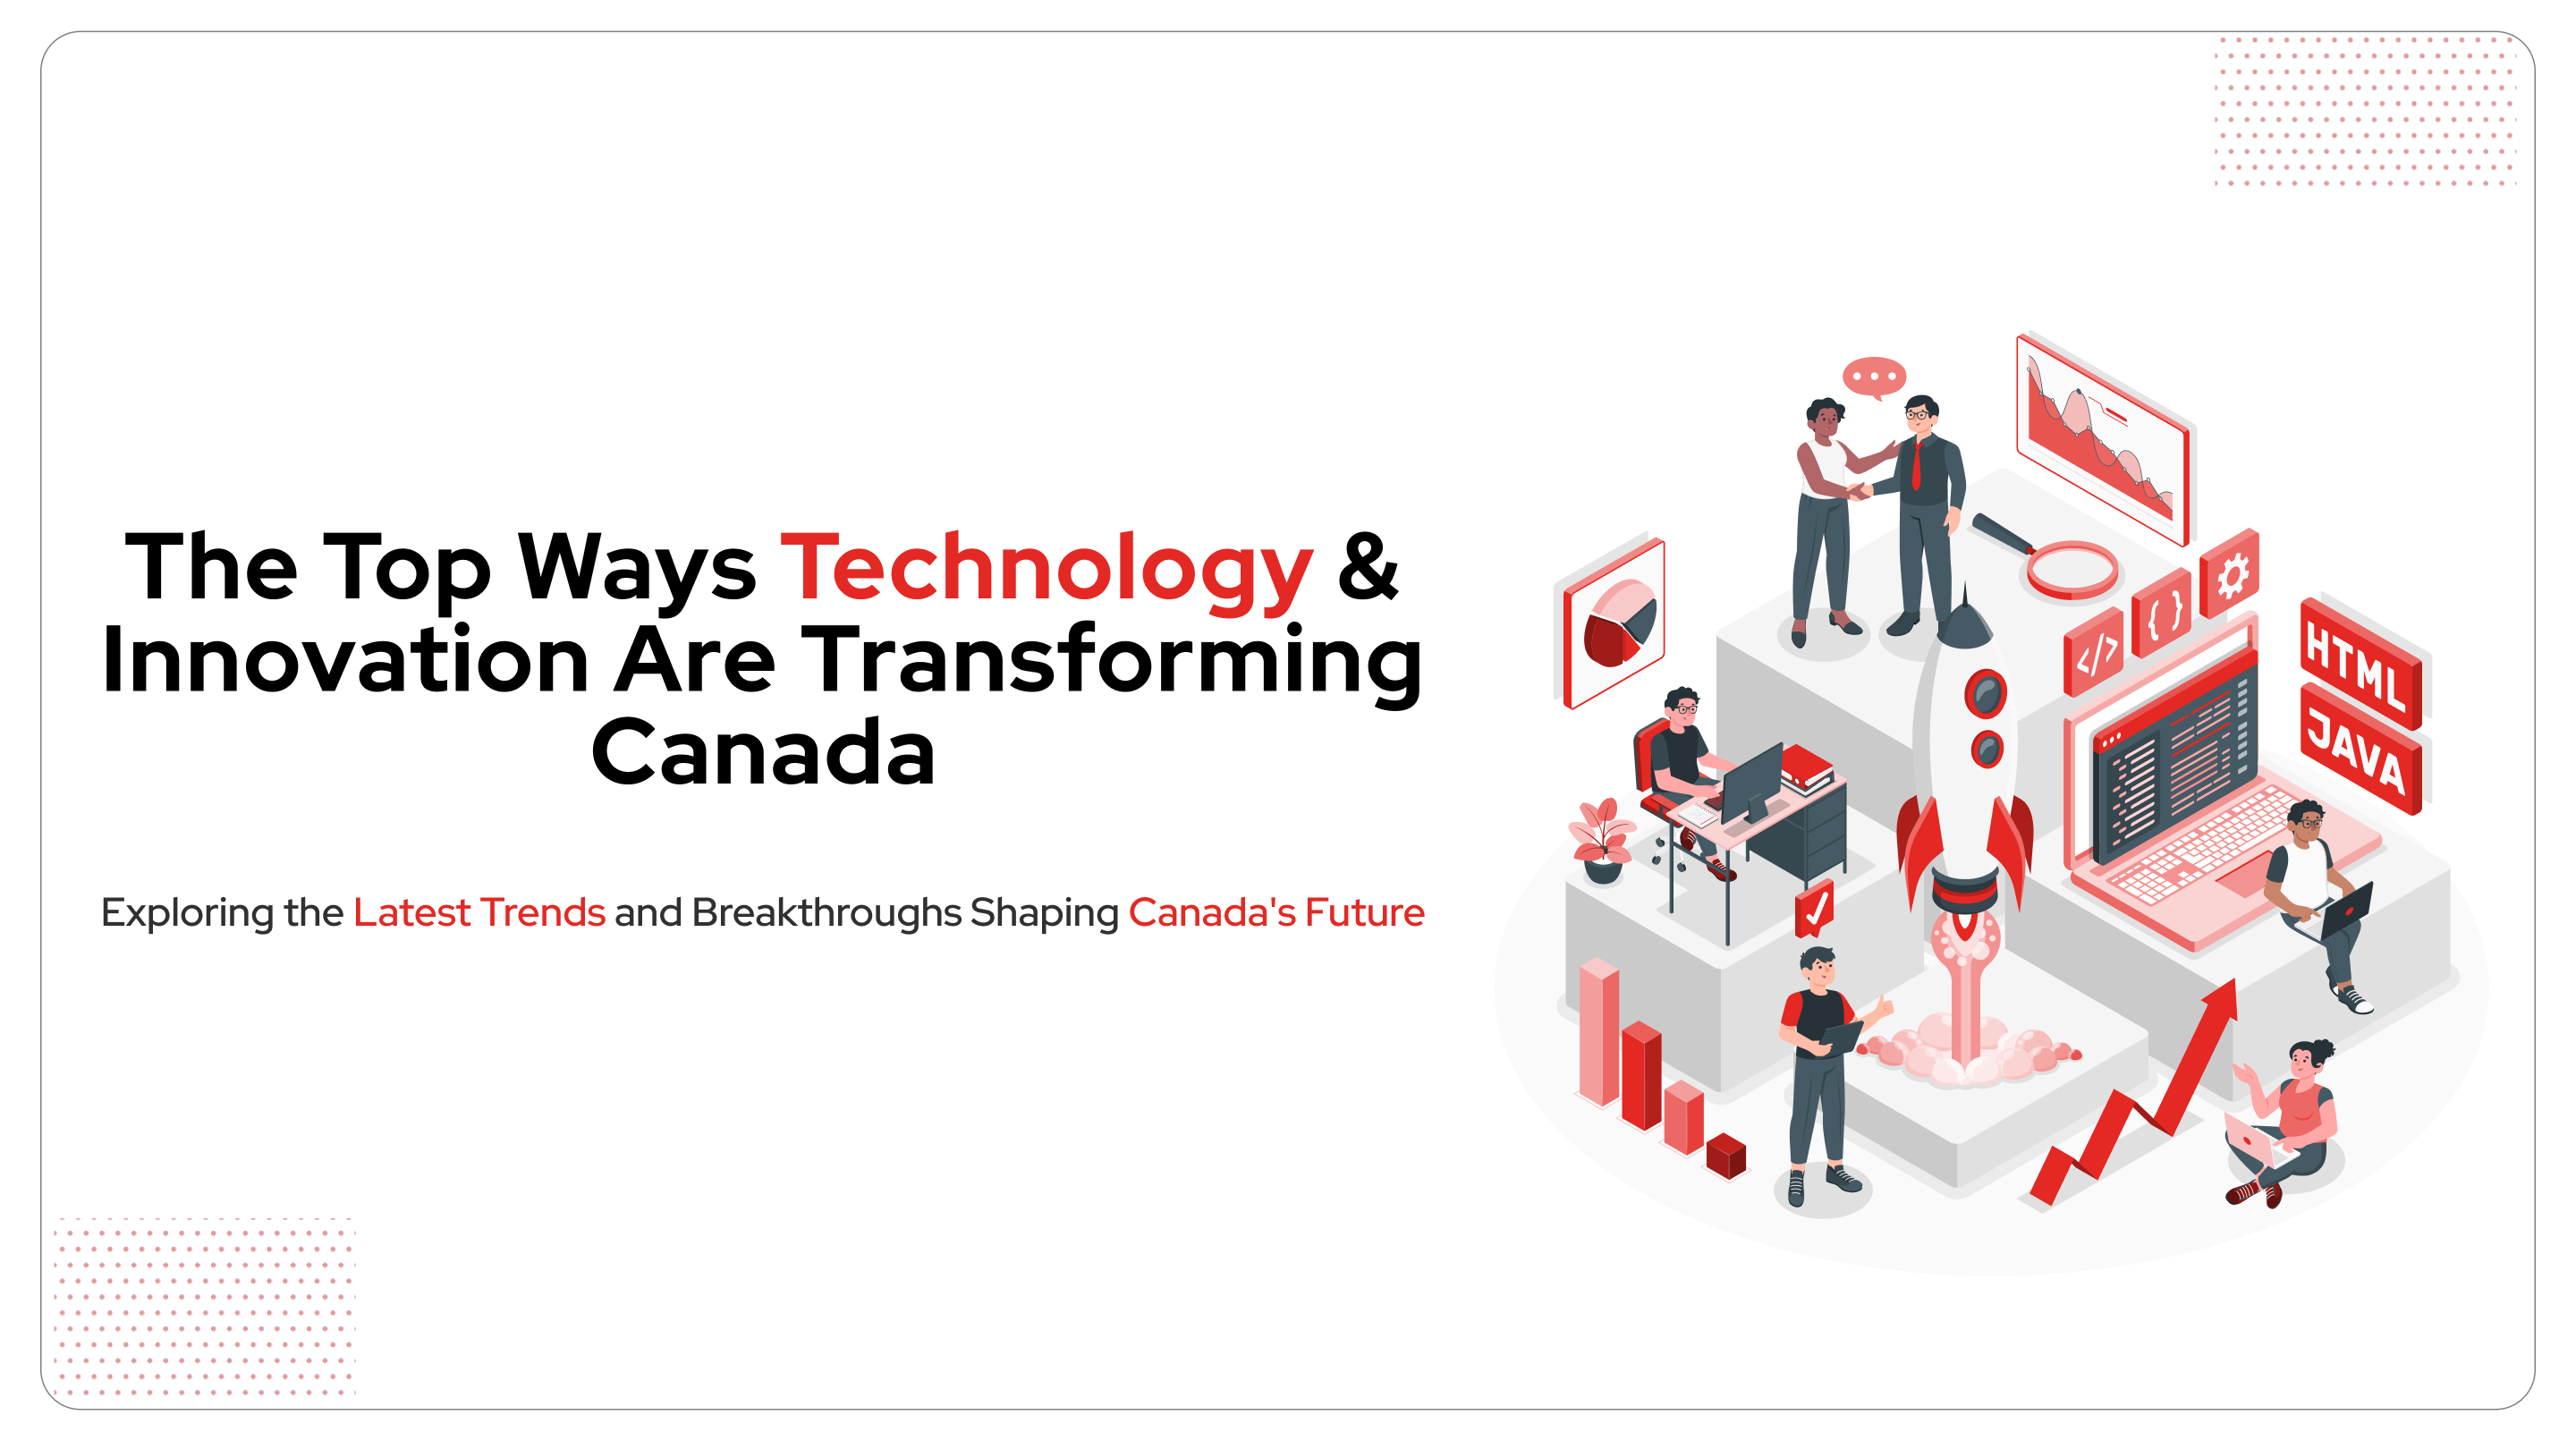 The Top Ways Technology & Innovation Are Transforming Canada